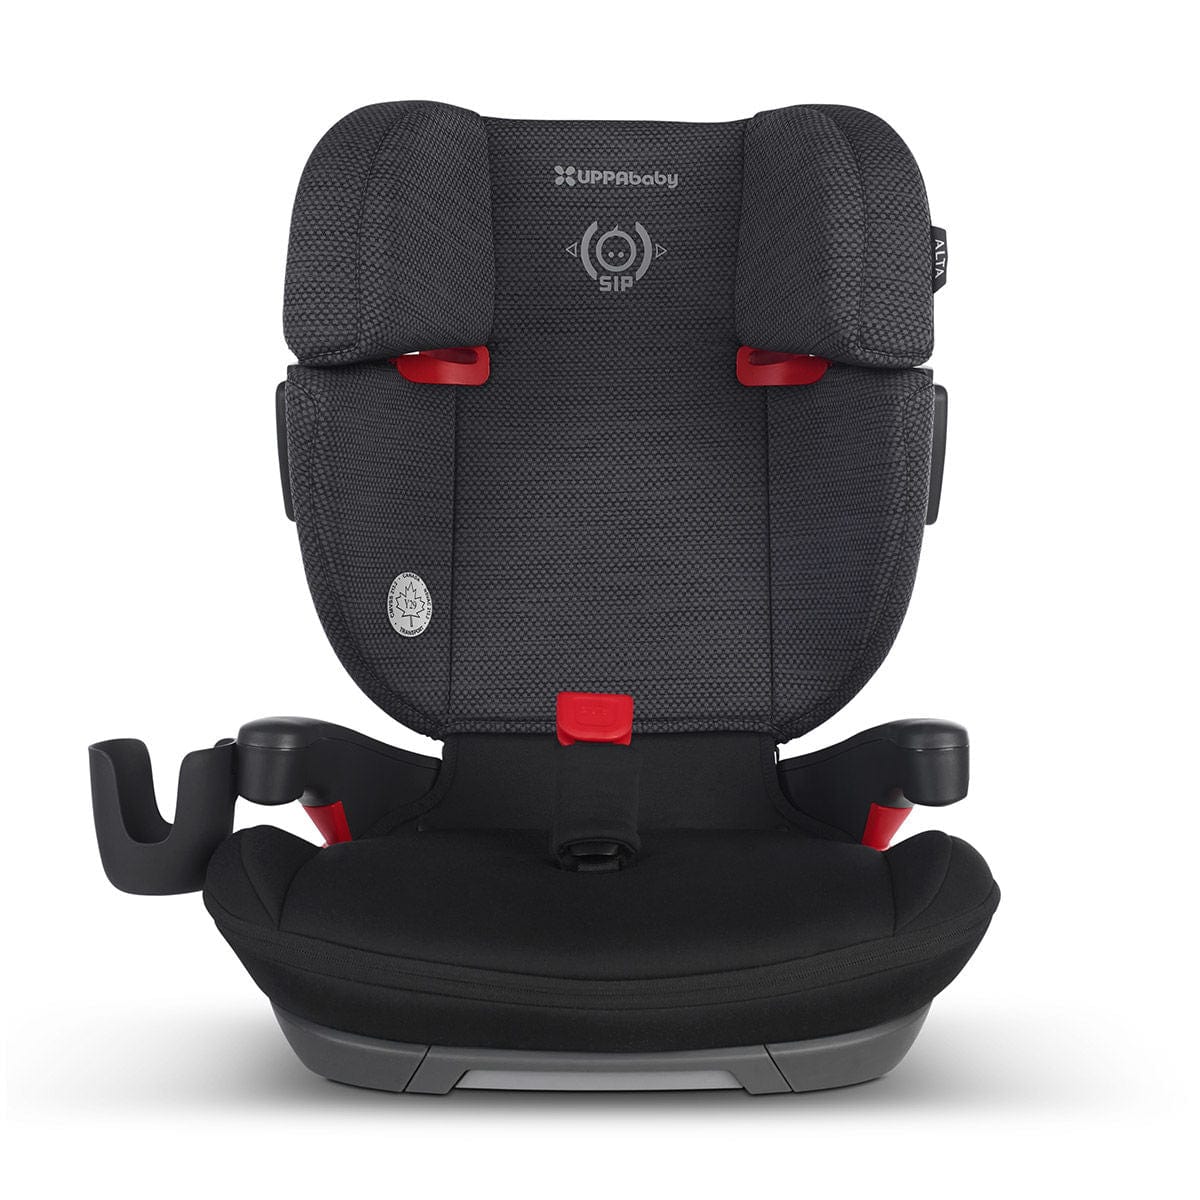 UPPAbaby booster seat Jake (Black) - UPPAbaby ALTA Booster UPPAbaby ALTA Full-Back Booster Seat